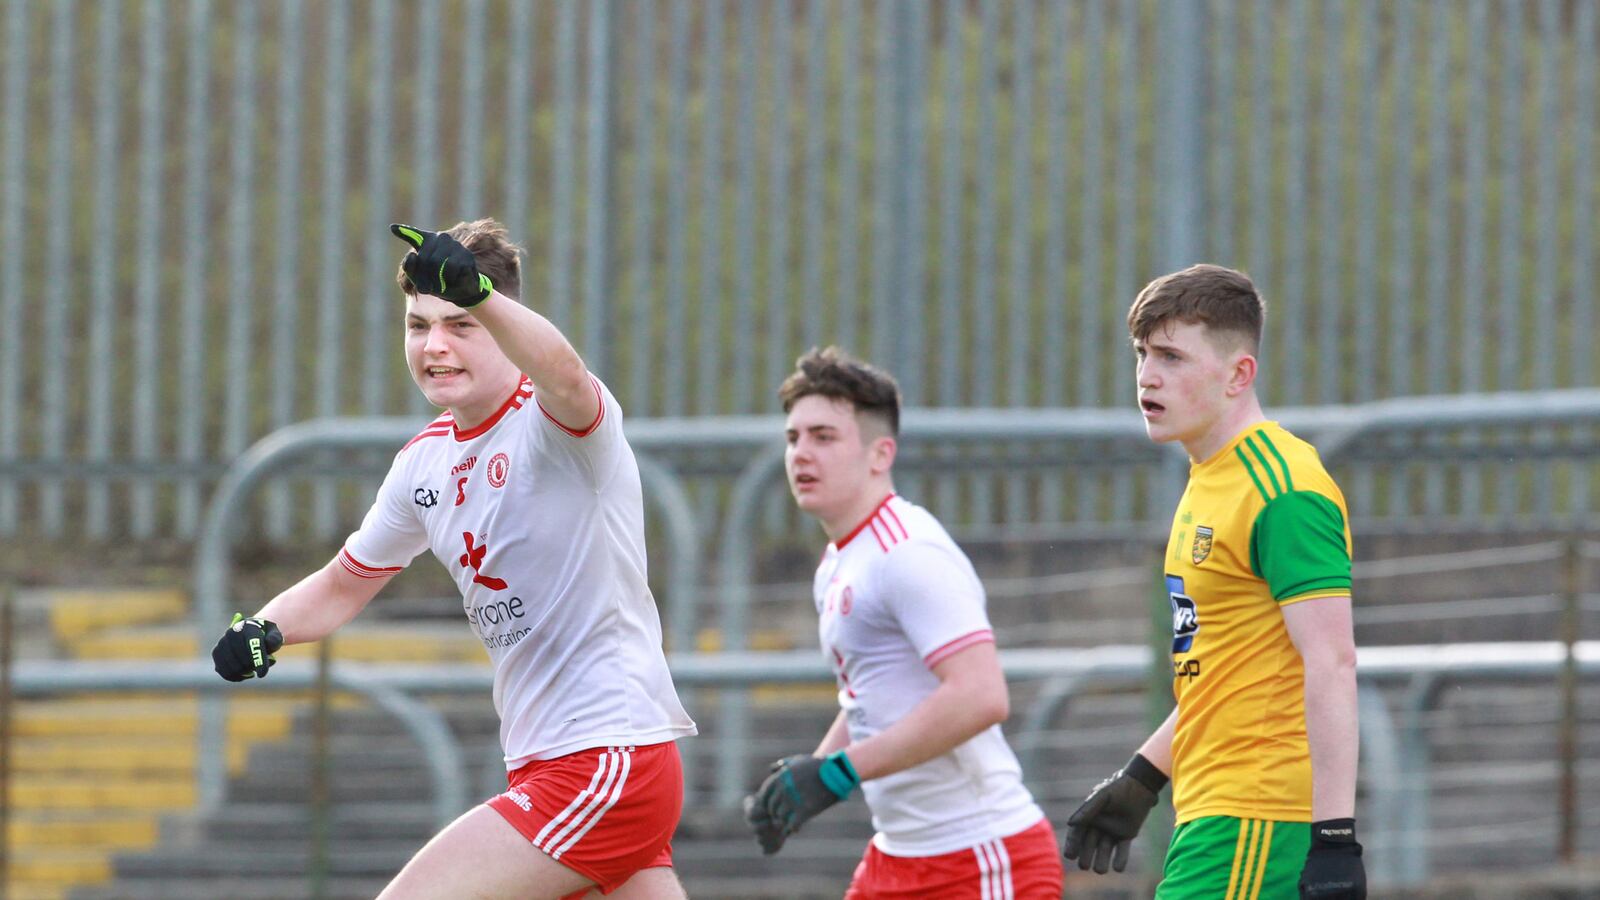 Tyrone Minors Beat Donegal With Five Goal Blast The Irish News